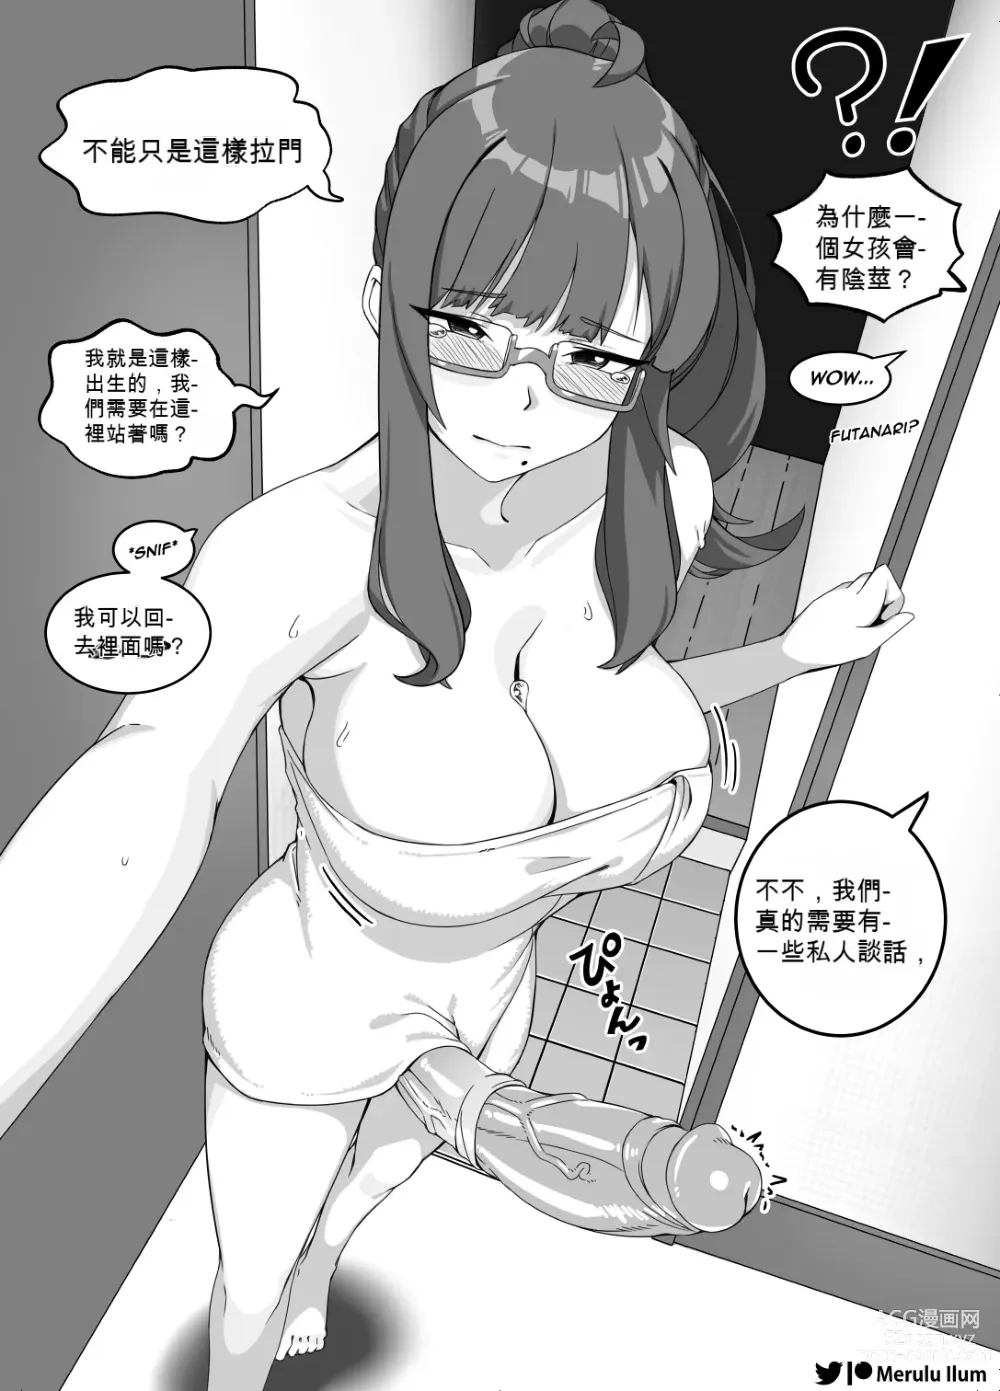 Page 16 of doujinshi Masturbation with a Giant Dick, Lets have fun!